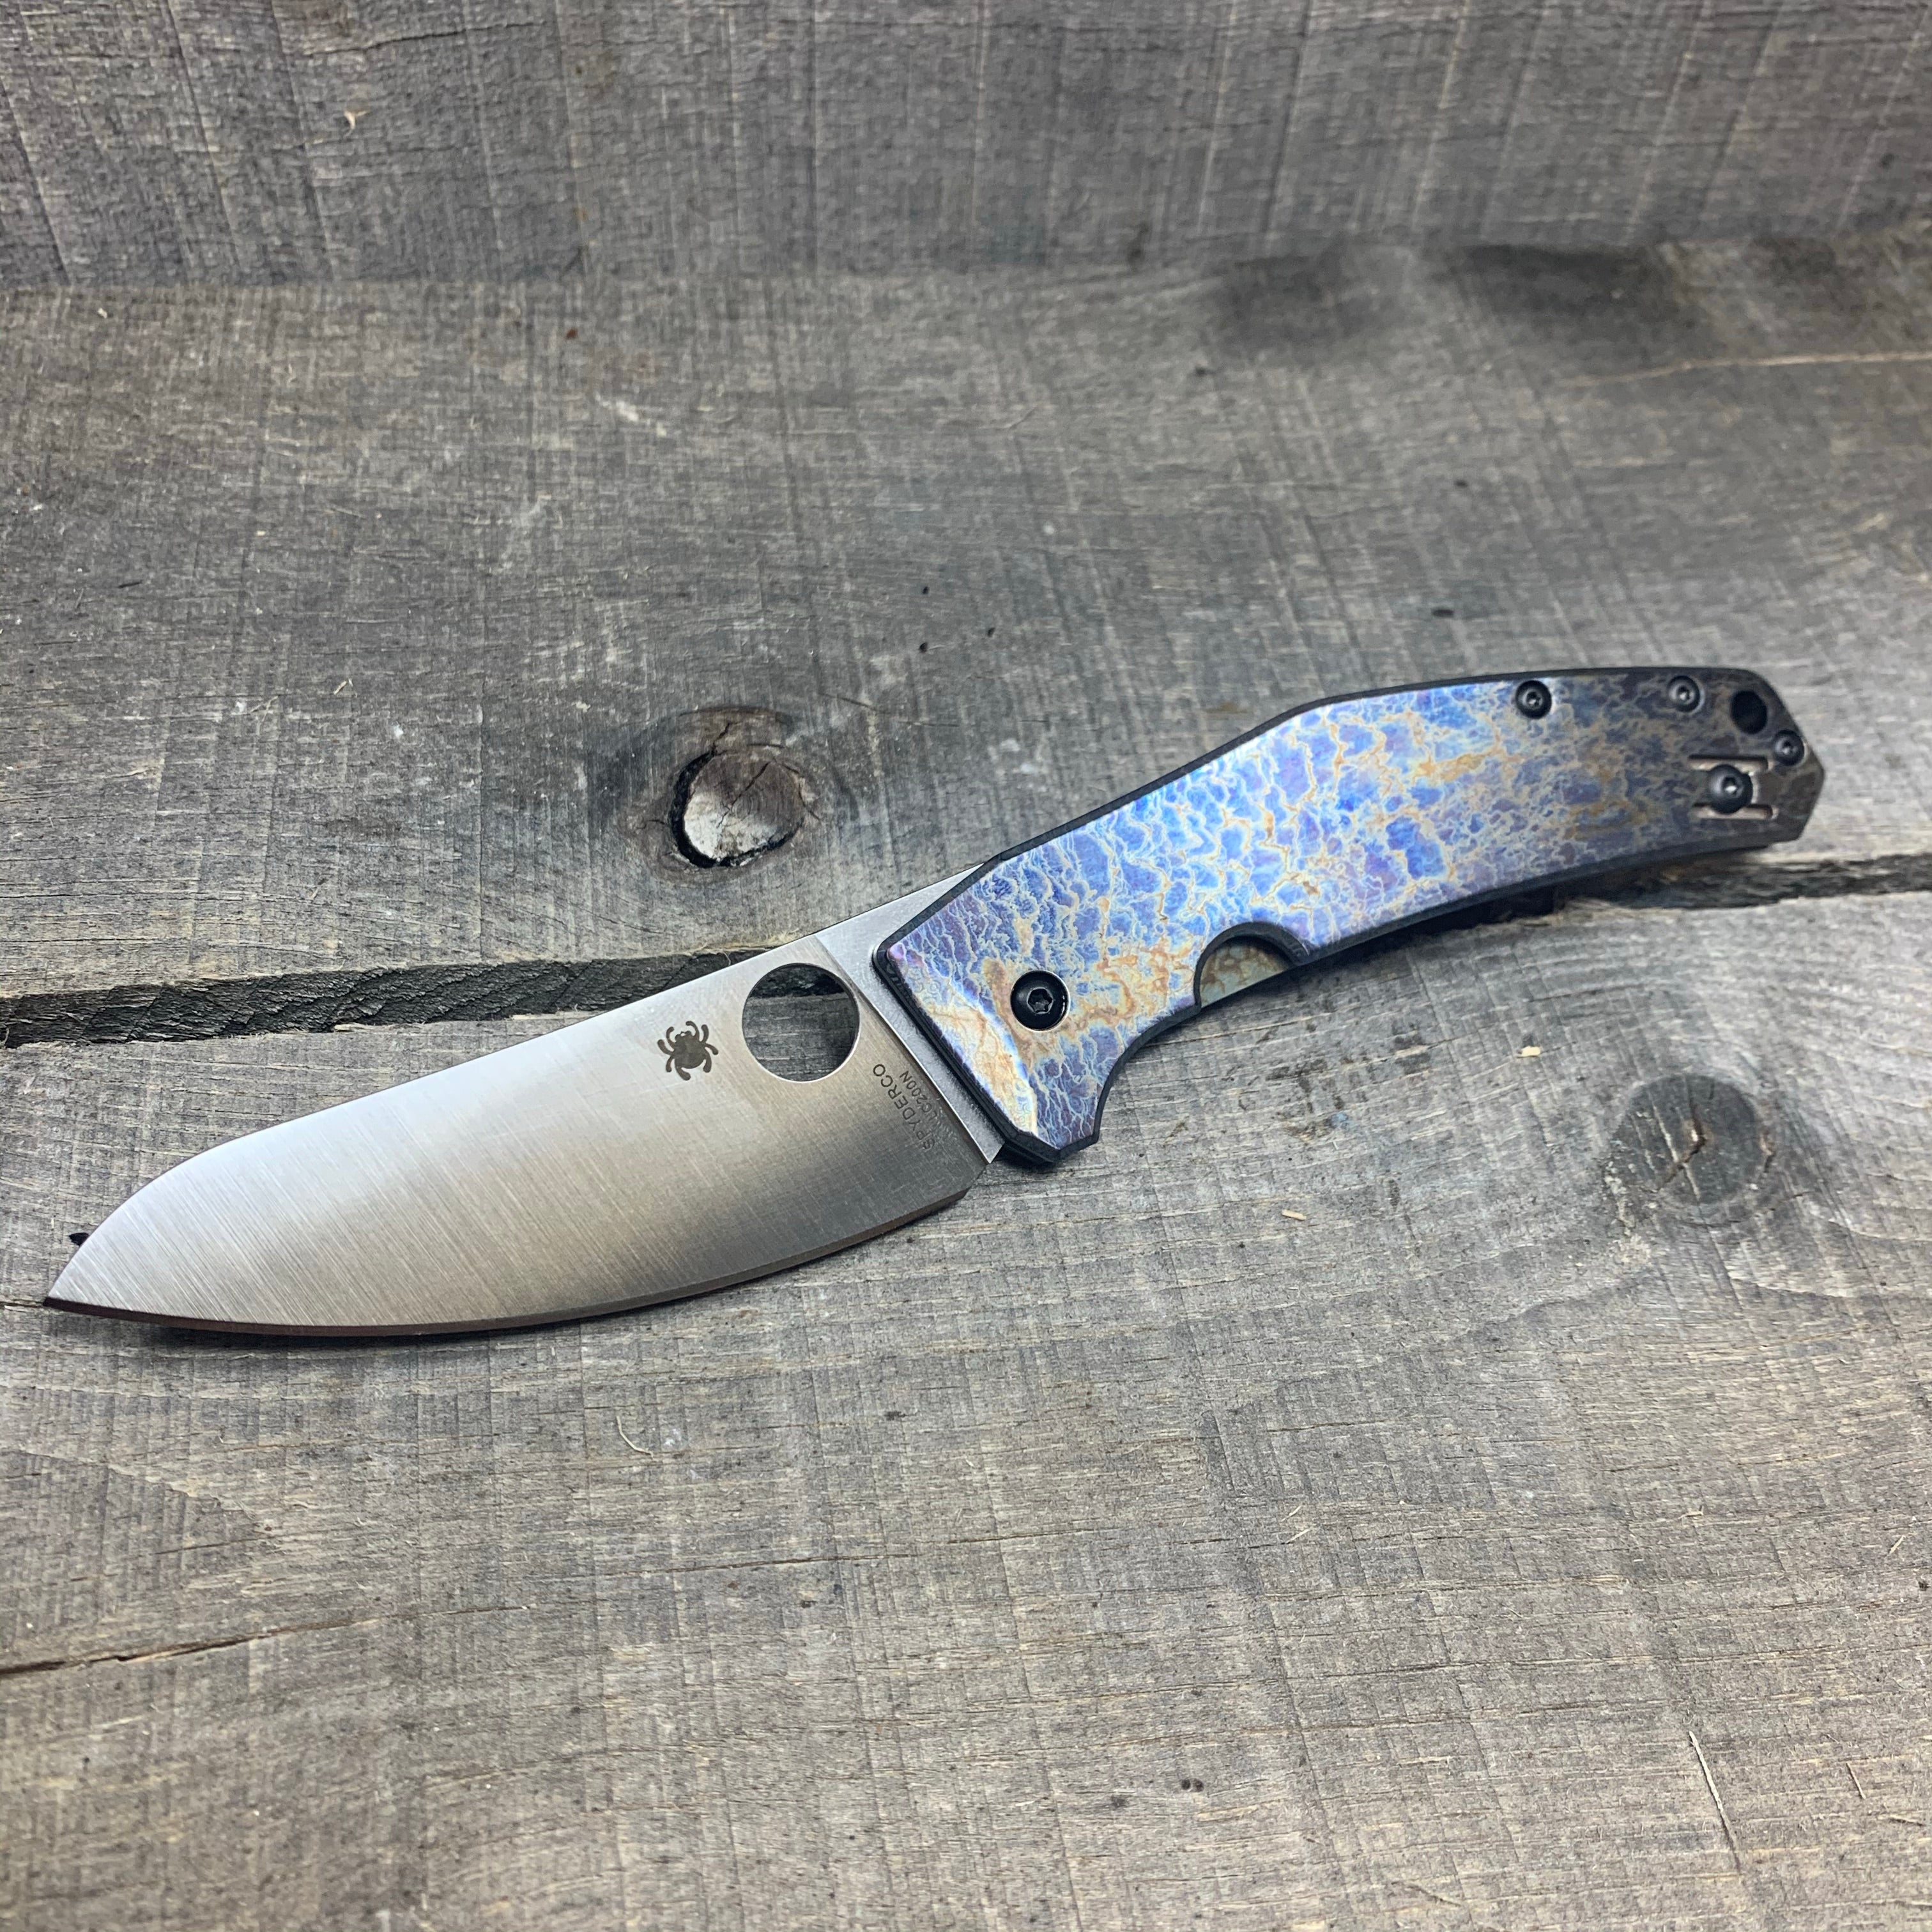 Previous St. Nick's Custom Anodized Knives